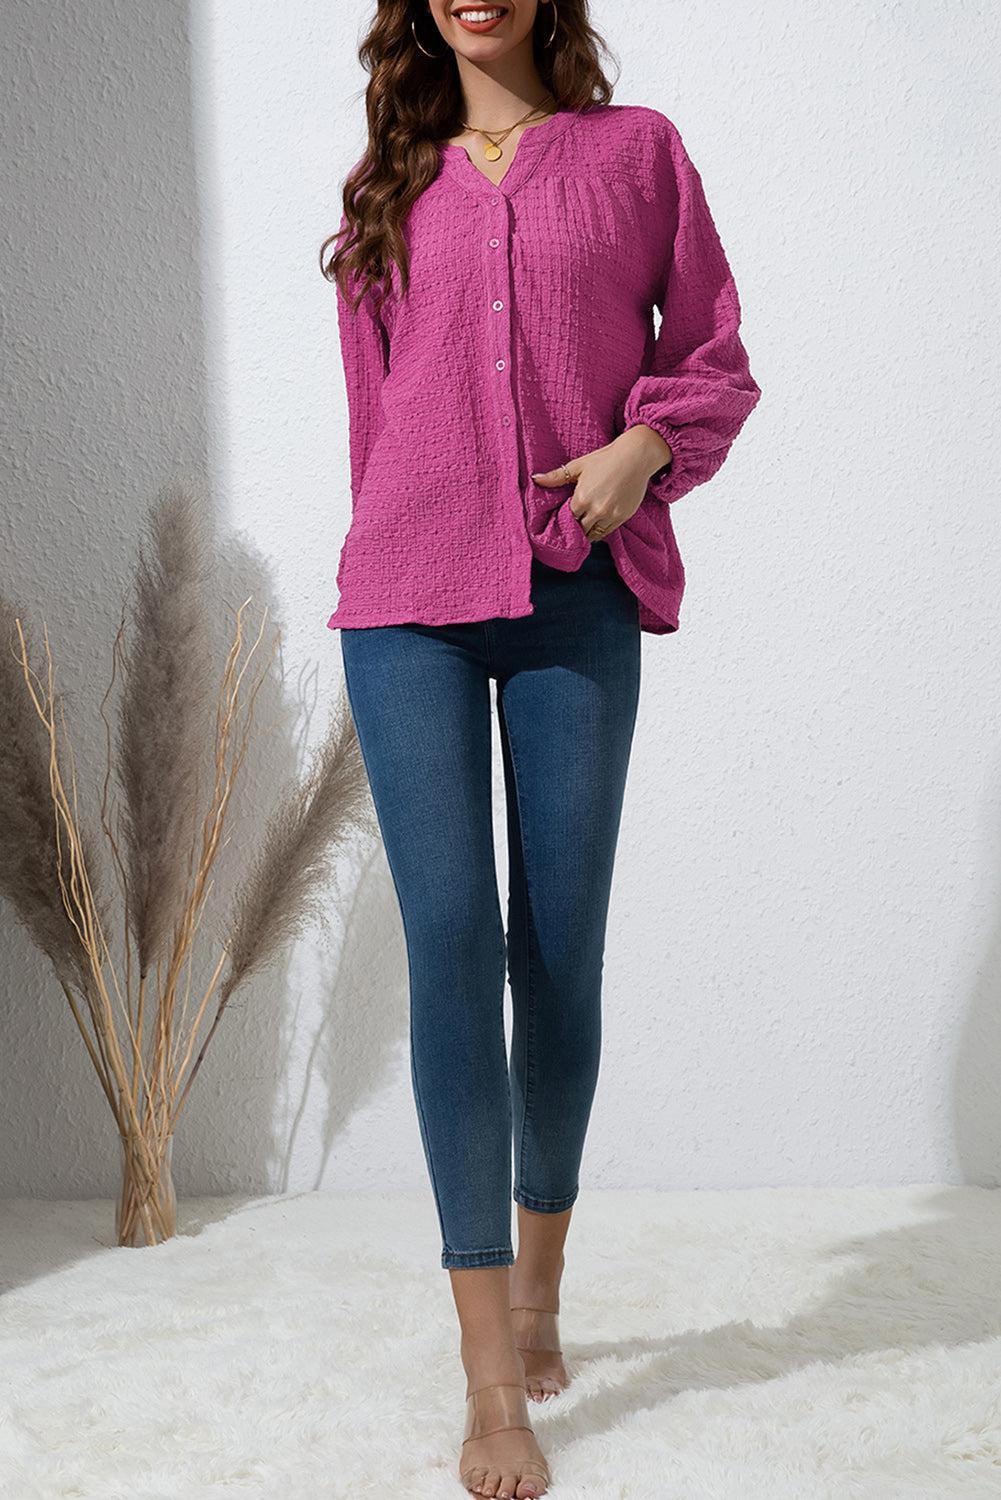 a woman in a pink shirt and jeans posing for a picture